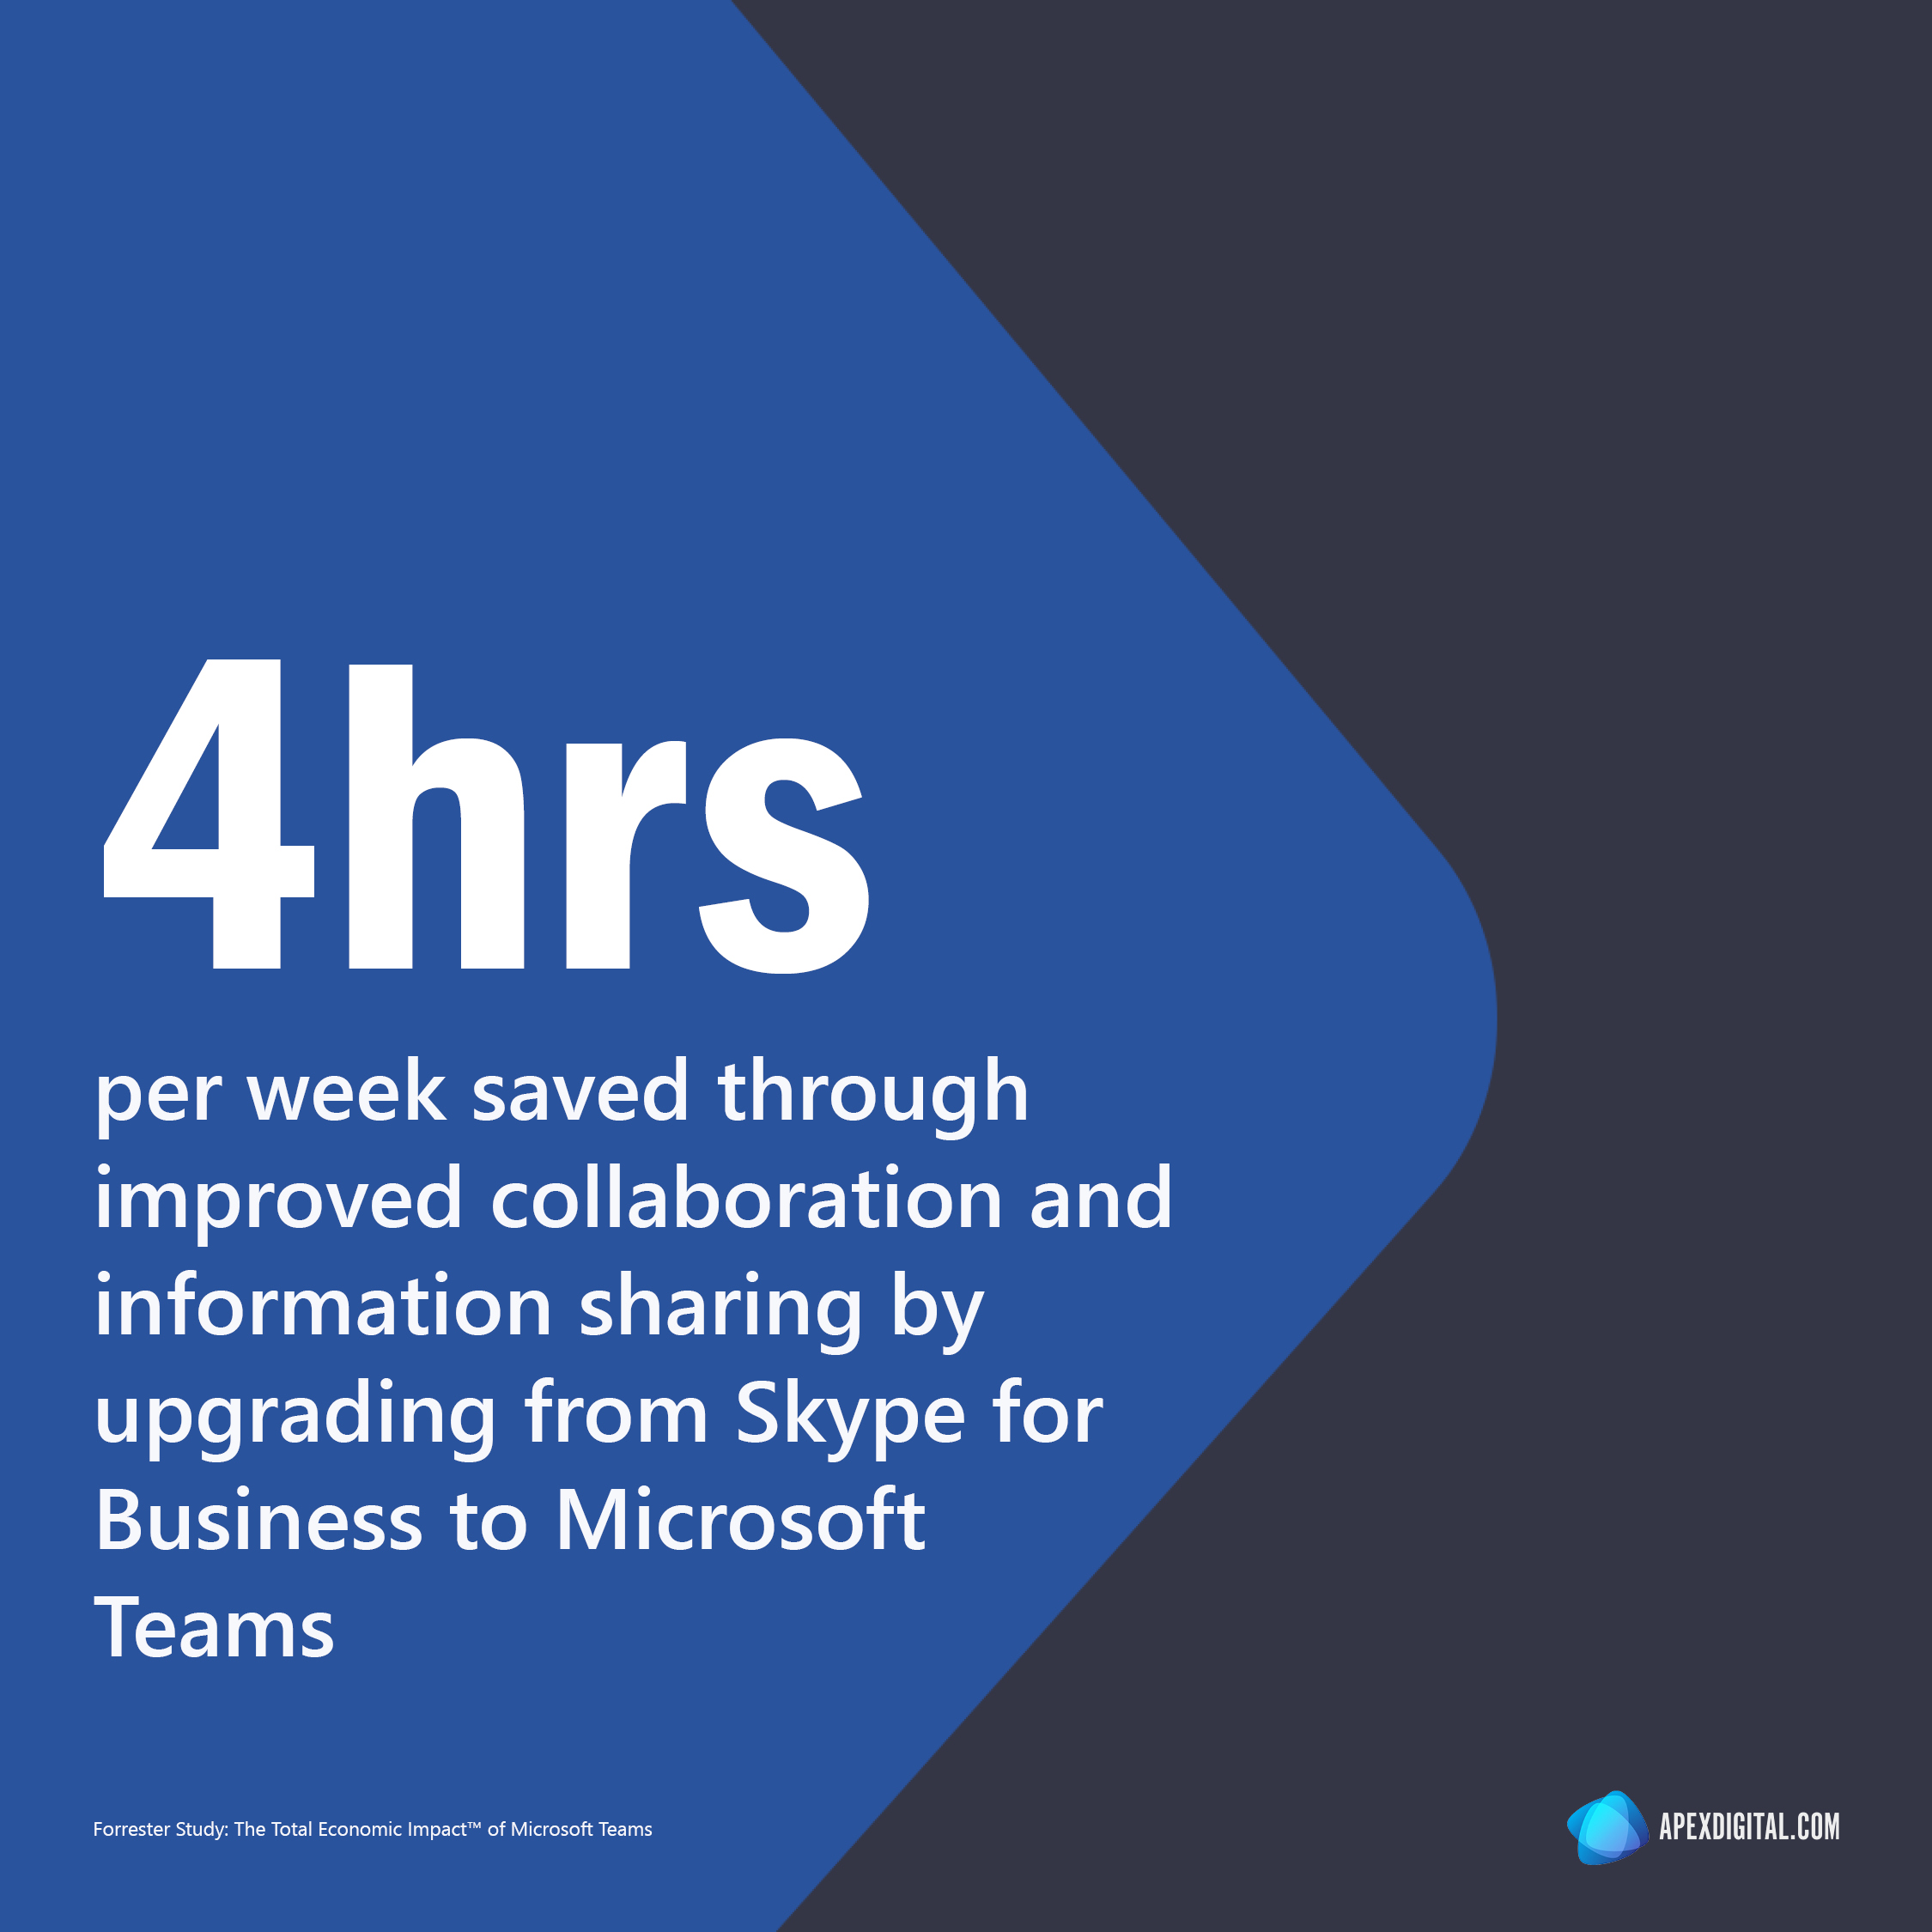 4 hours per week are saved through improved collaboration and information sharing by upgrading from Skype for Business to Microsoft Teams